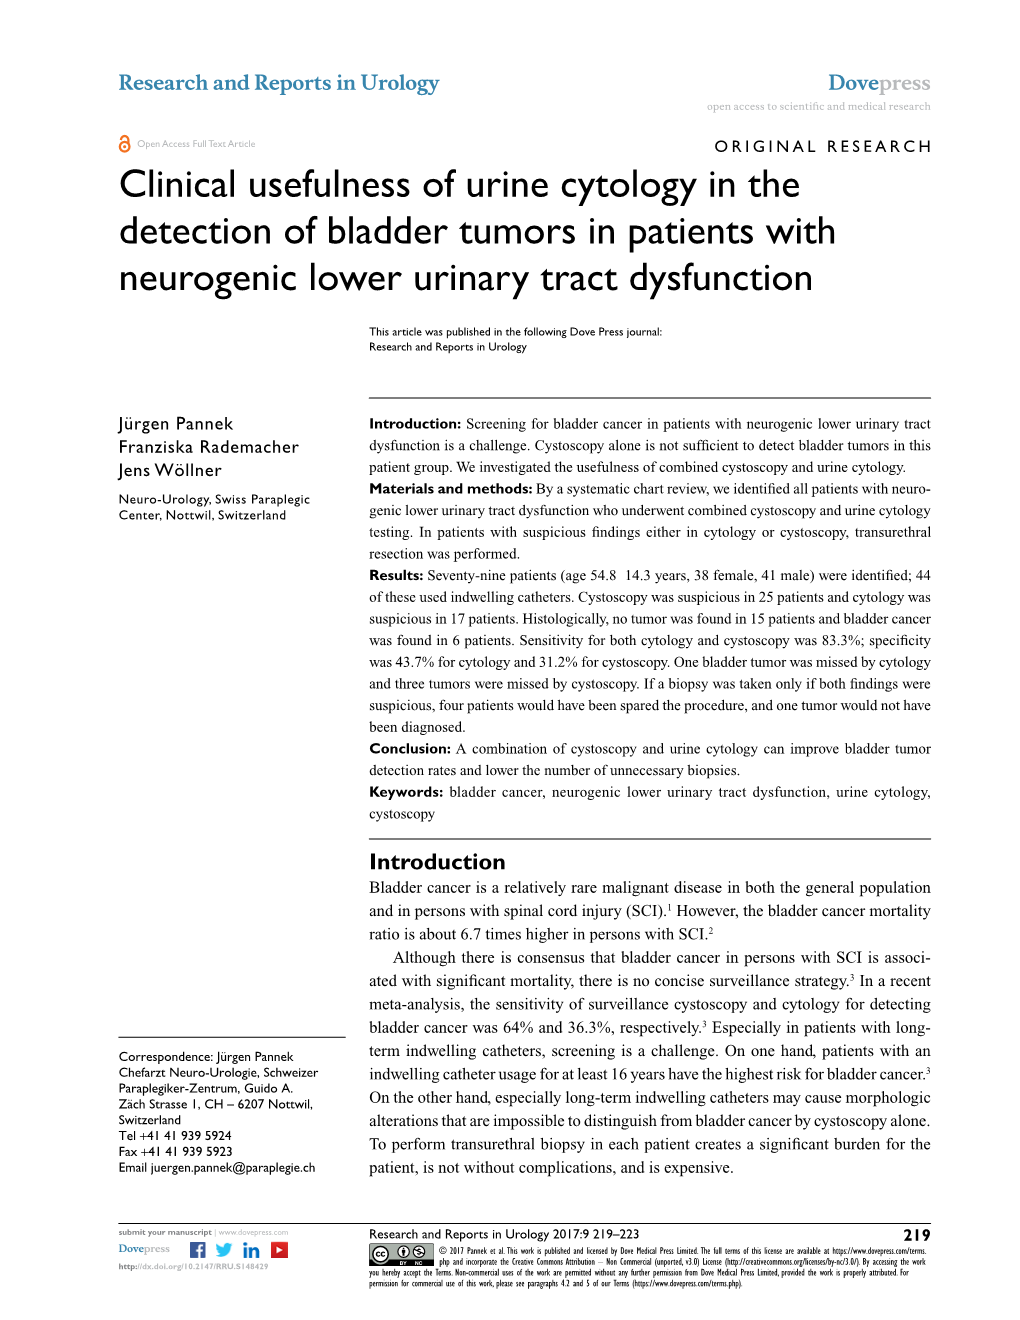 Clinical Usefulness of Urine Cytology in the Detection of Bladder Tumors in Patients with Neurogenic Lower Urinary Tract Dysfunction